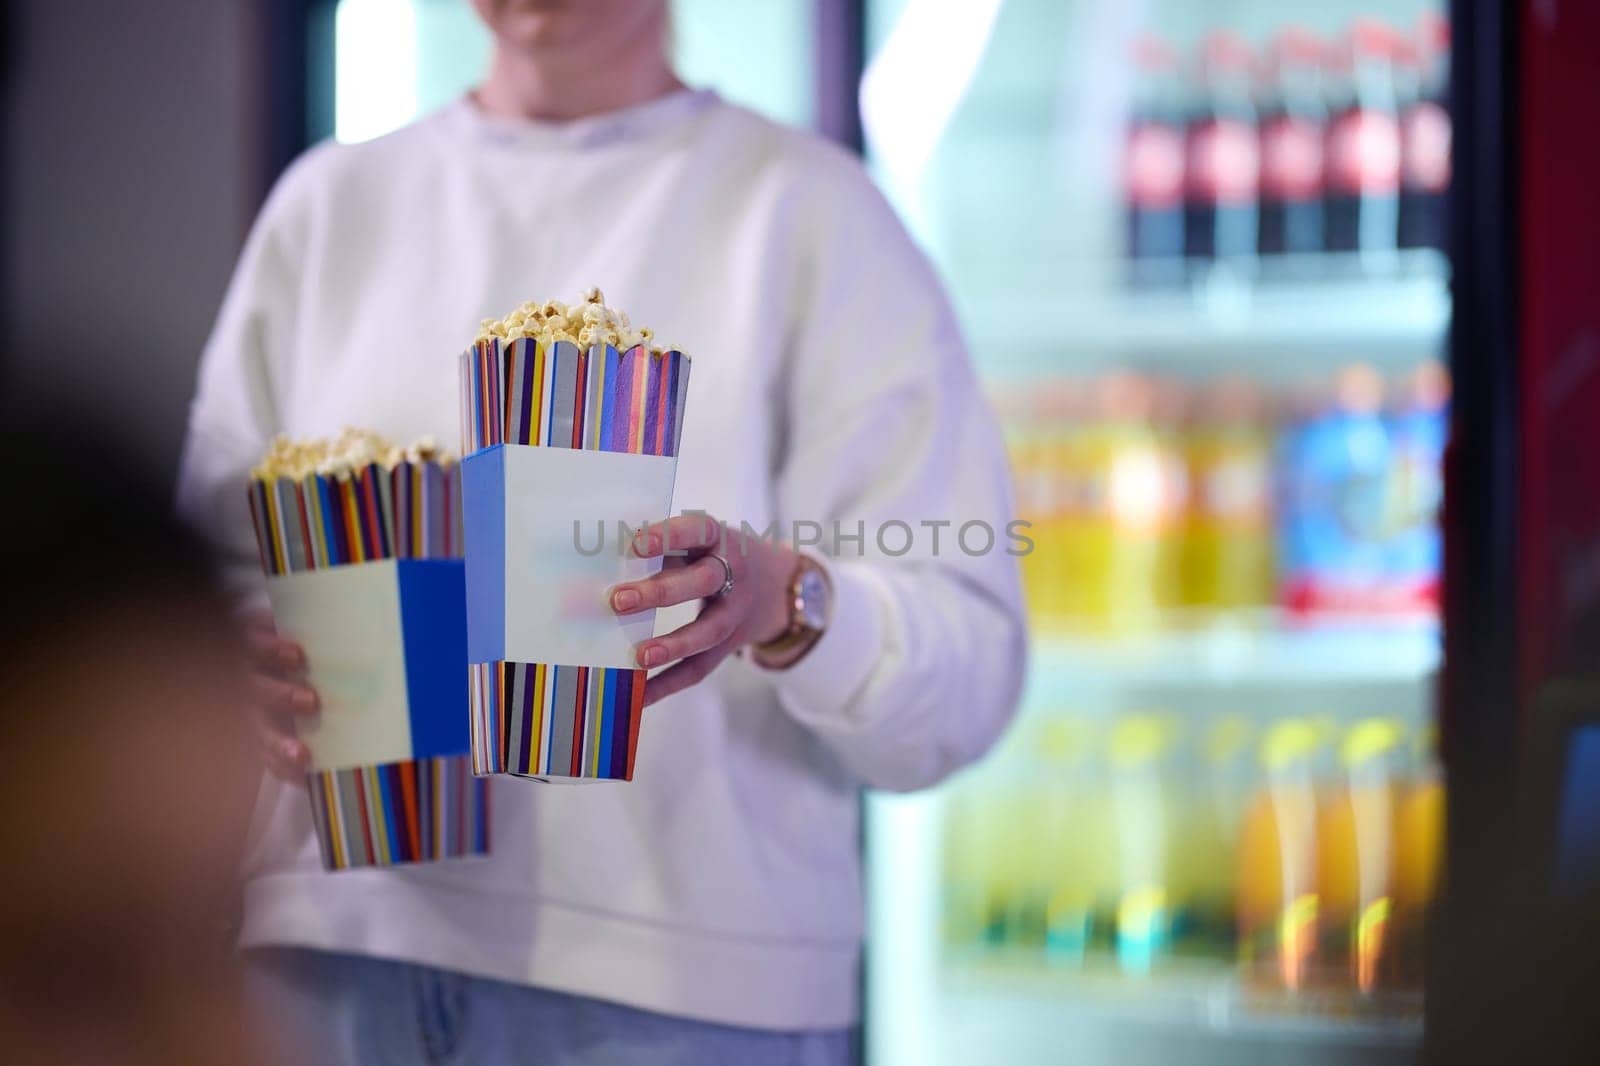 A vendor stands outside the cinema, holding freshly popped popcorn to sell to moviegoers before they enter the theater by dotshock